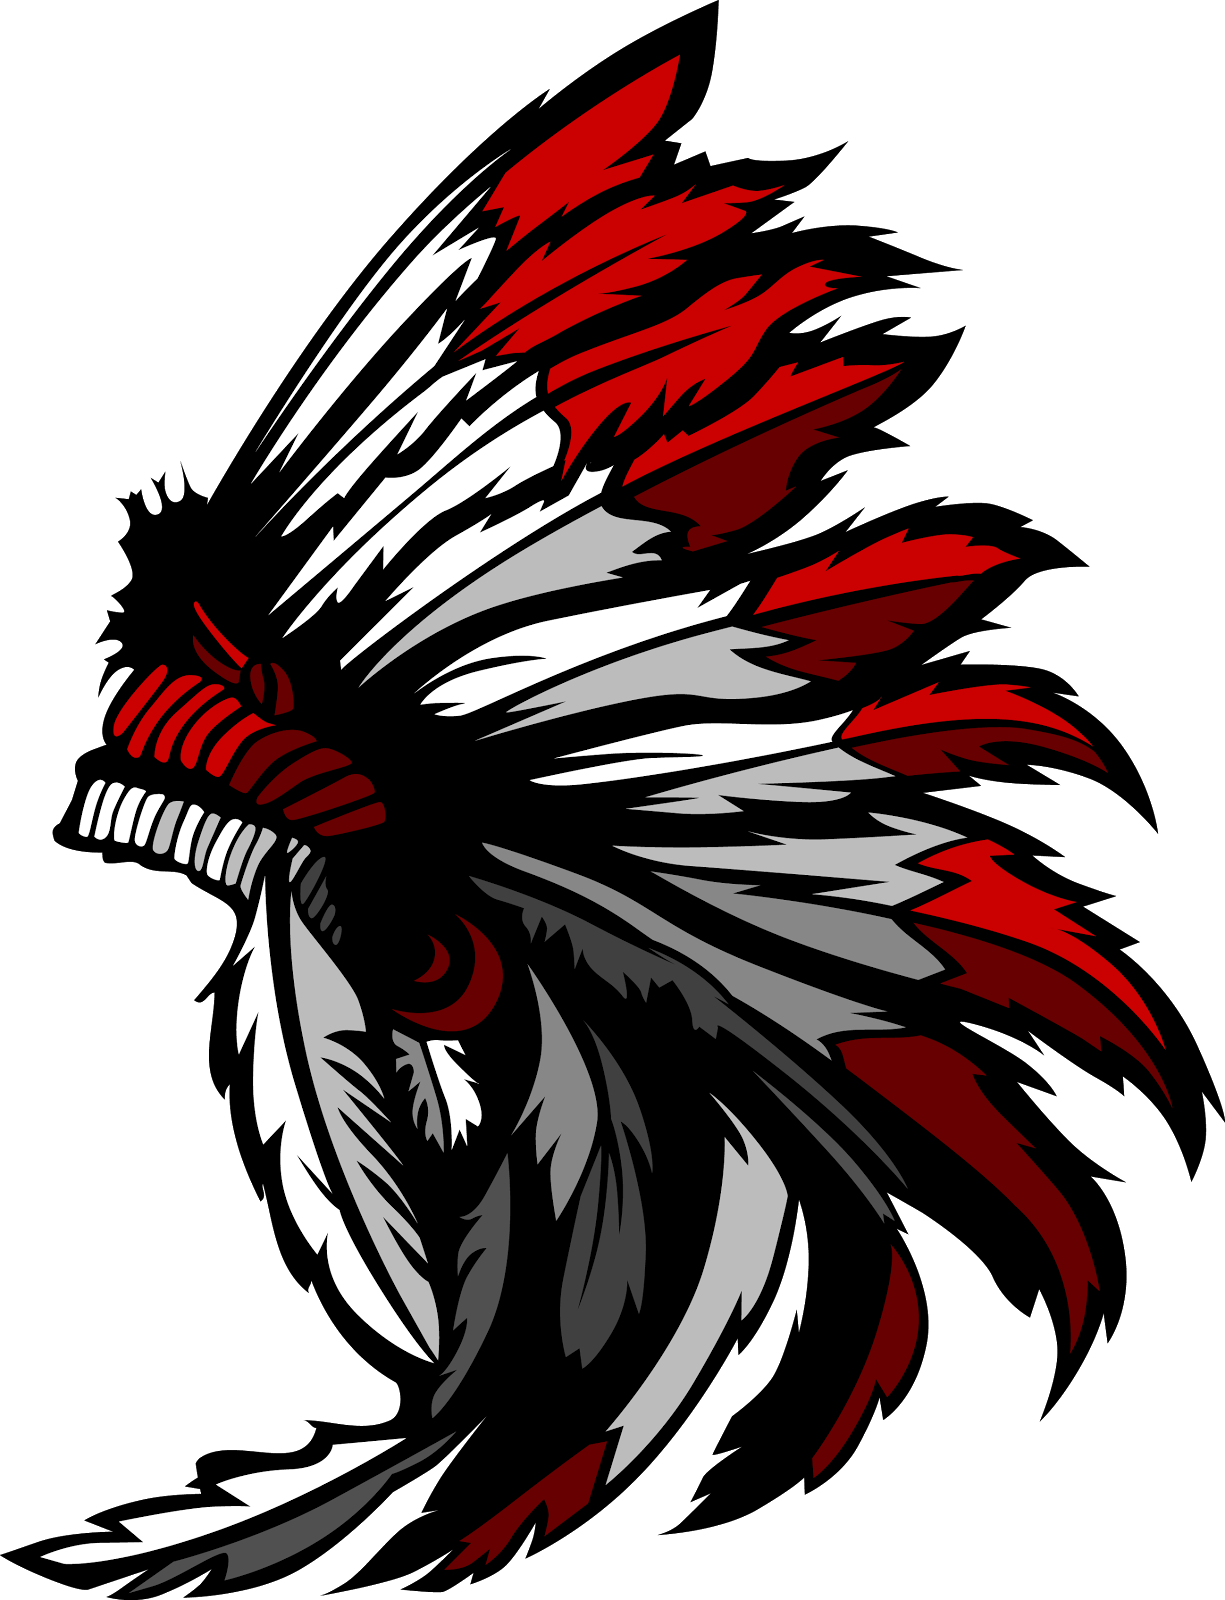 Buy Your Yearbook Now - Red Indian Tattoo Design (1225x1600)